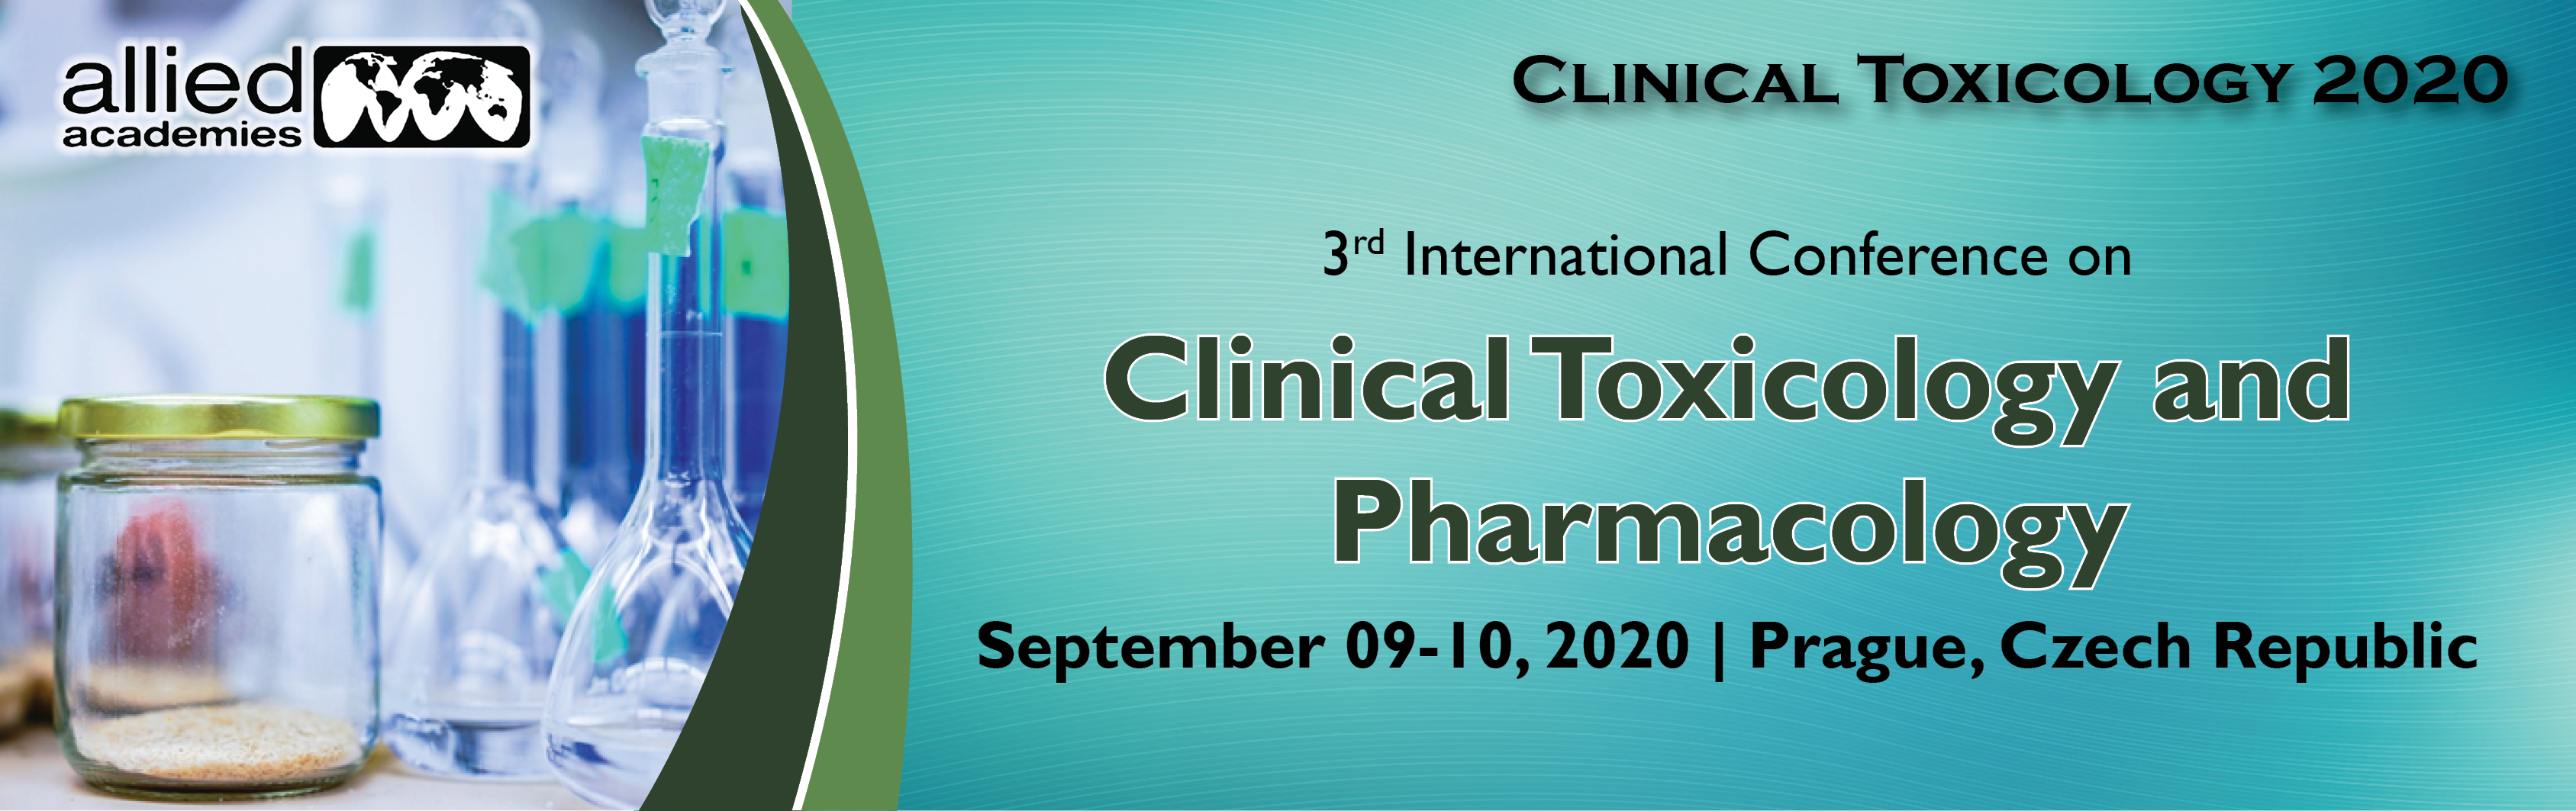 Clinical Toxicology Conference Pharmacology Conference